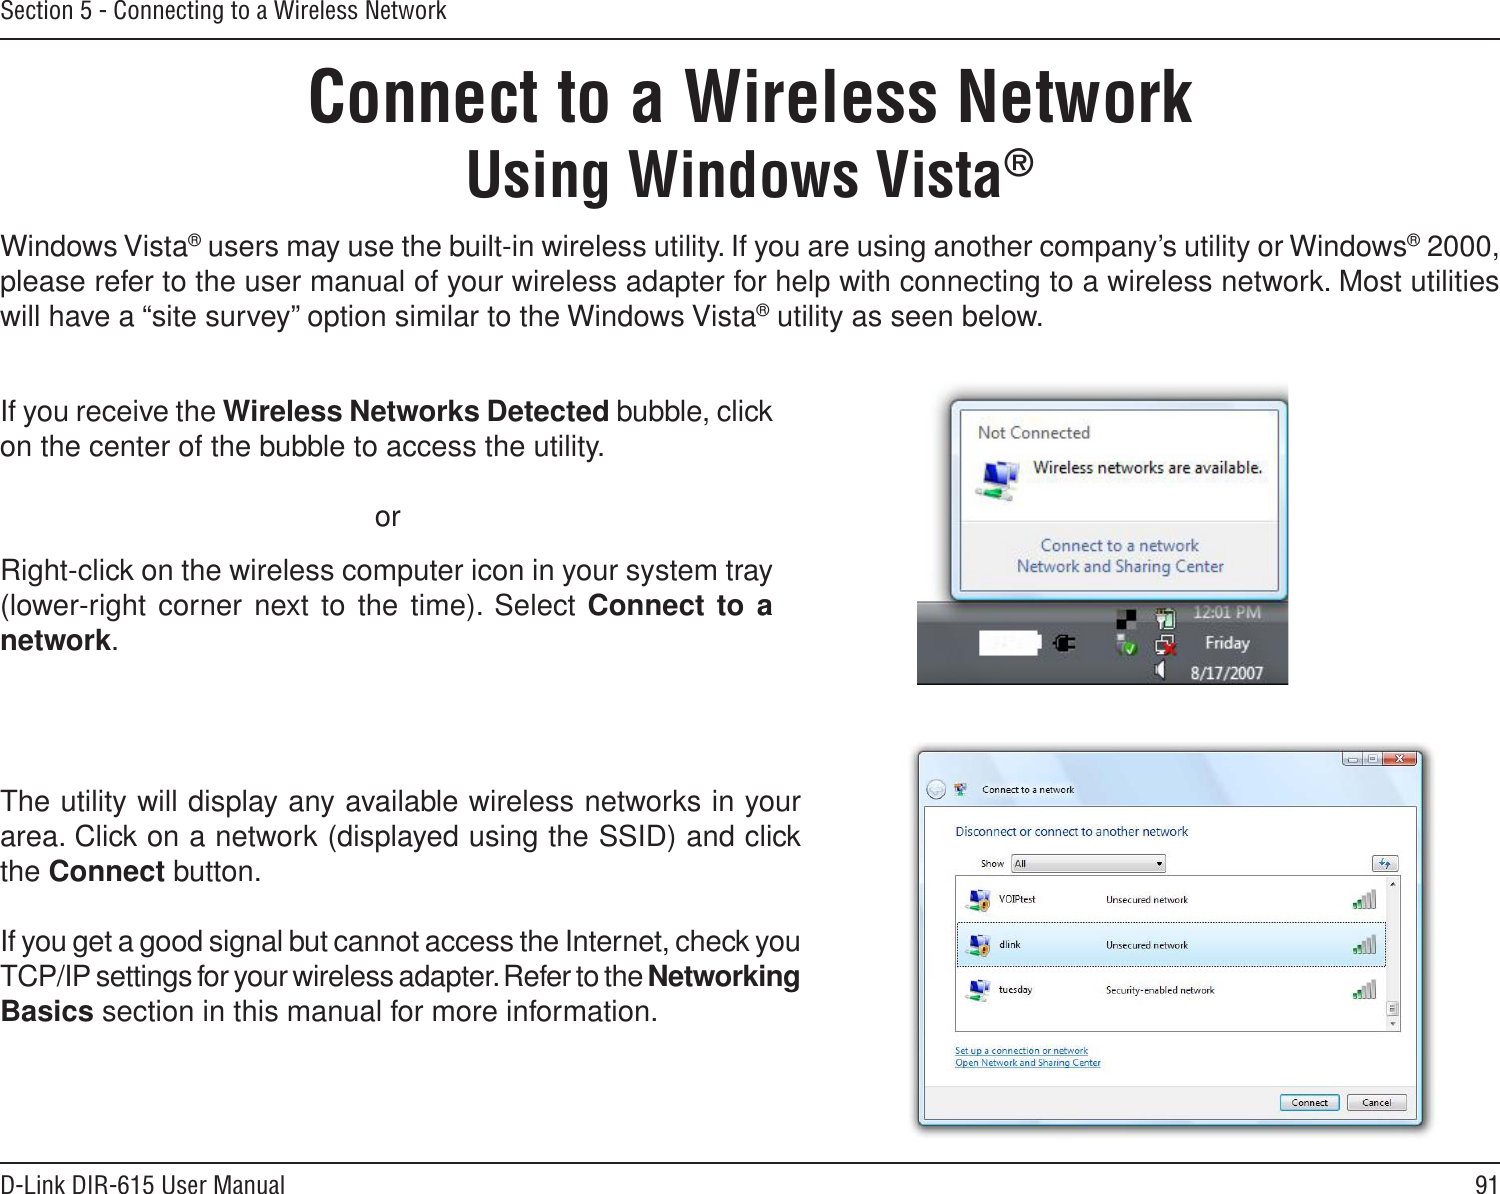 91D-Link DIR-615 User ManualSection 5 - Connecting to a Wireless NetworkConnect to a Wireless NetworkUsing Windows Vista®Windows Vista® users may use the built-in wireless utility. If you are using another company’s utility or Windows® 2000, please refer to the user manual of your wireless adapter for help with connecting to a wireless network. Most utilities will have a “site survey” option similar to the Windows Vista® utility as seen below.Right-click on the wireless computer icon in your system tray (lower-right corner next to the time). Select Connect to a network.If you receive the Wireless Networks Detected bubble, click on the center of the bubble to access the utility.     orThe utility will display any available wireless networks in your area. Click on a network (displayed using the SSID) and click the Connect button.If you get a good signal but cannot access the Internet, check you TCP/IP settings for your wireless adapter. Refer to the Networking Basics section in this manual for more information.